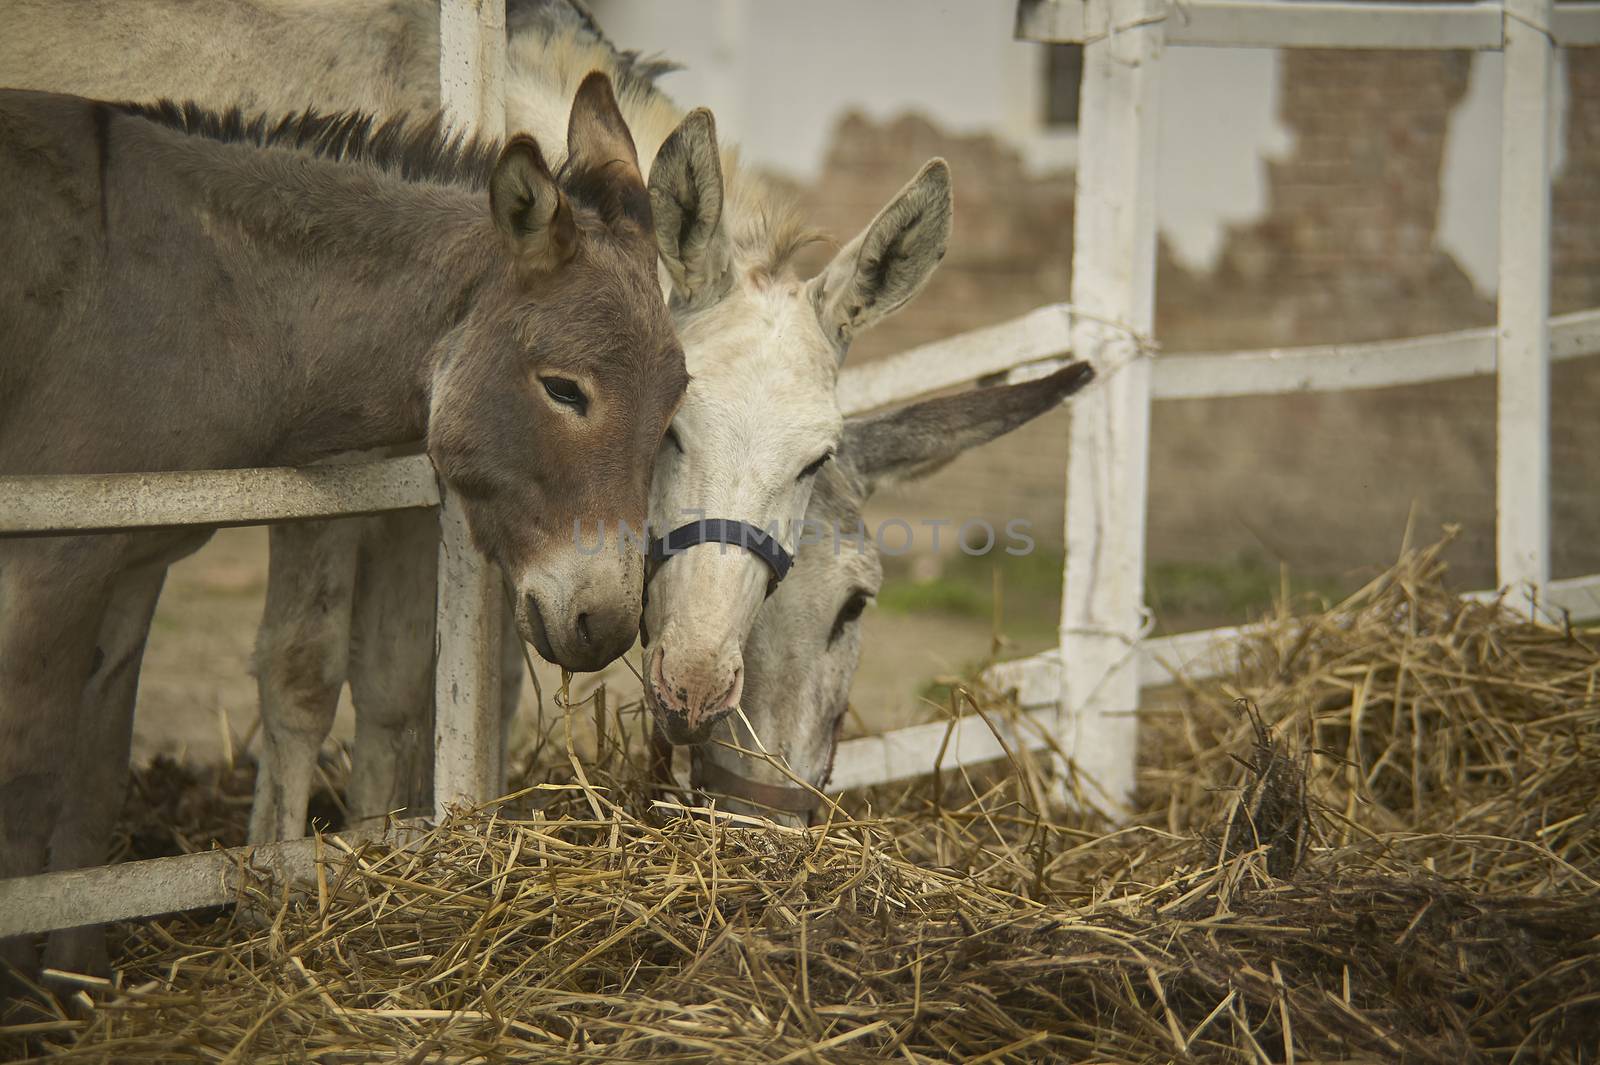 The meal of three donkeys by pippocarlot